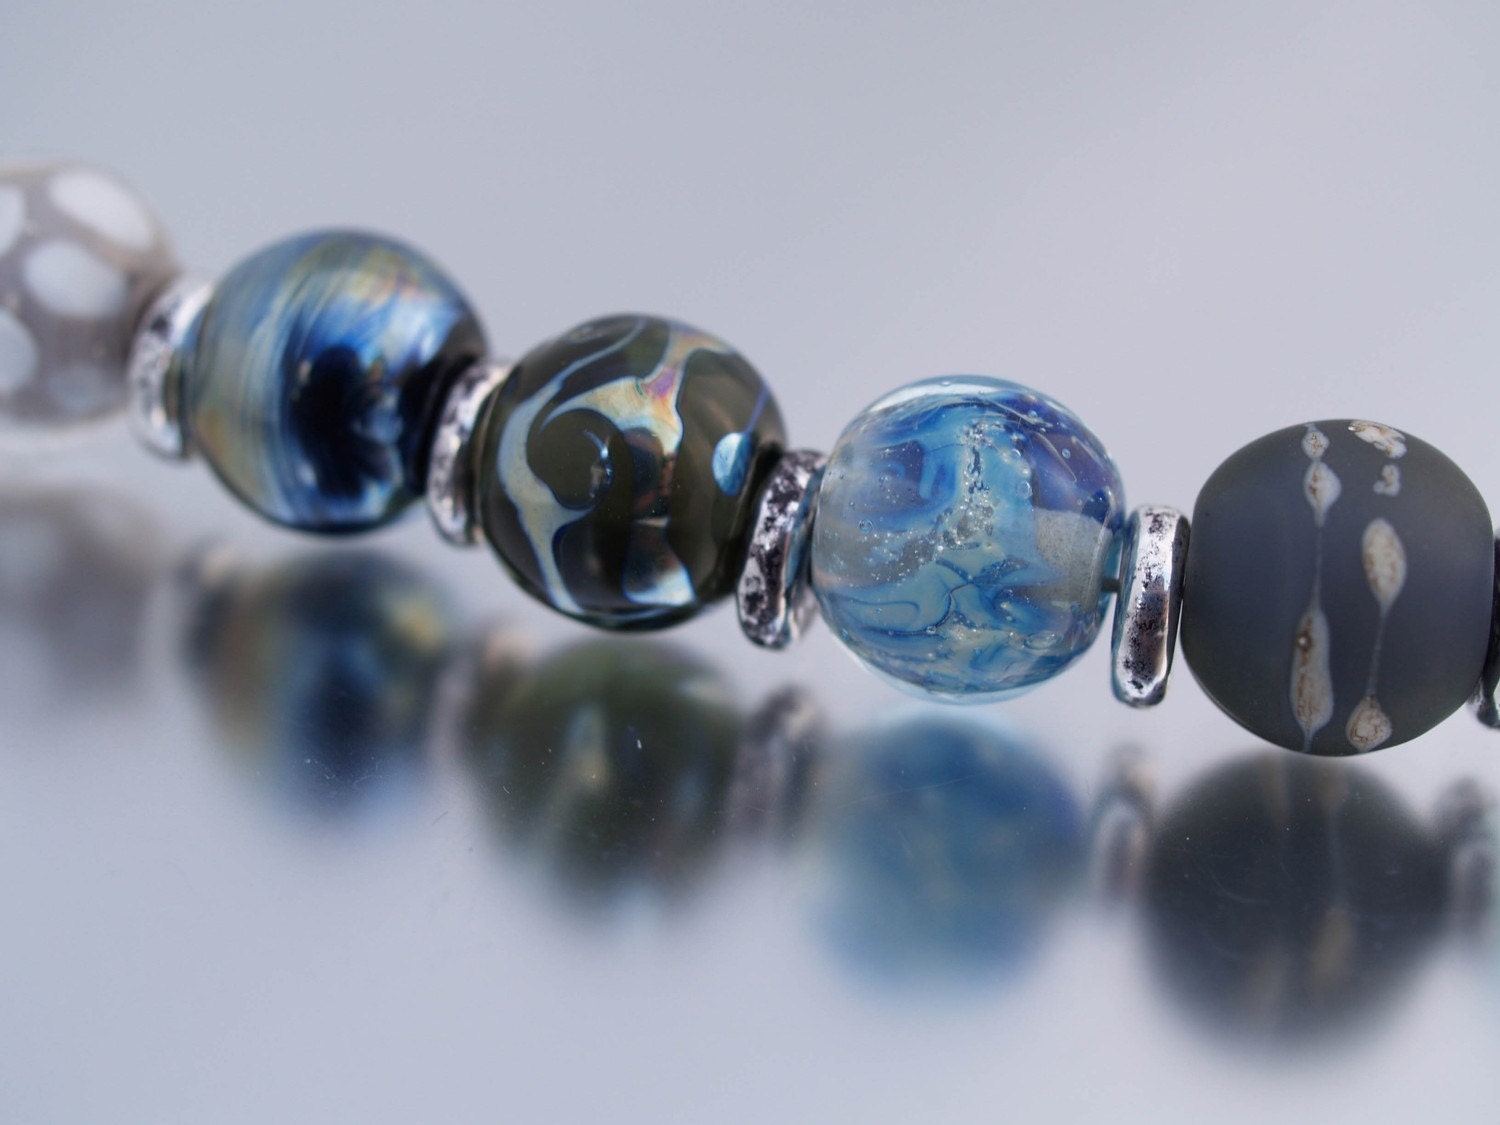 eight handmade glass beads in icy shades of blue and grey